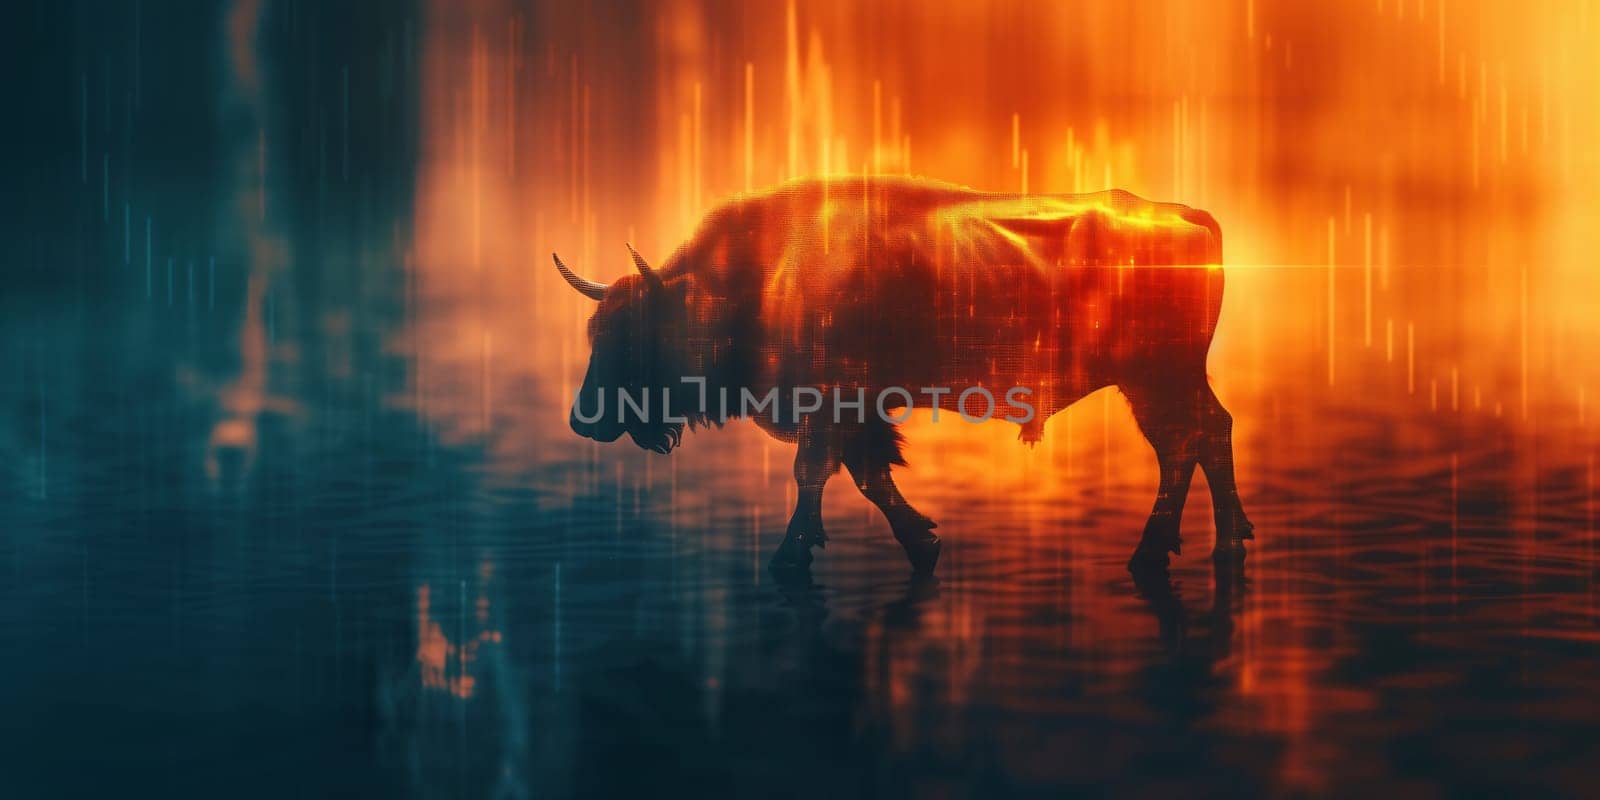 silhouette form of bull on financial stock market graph represent stock market rising or uptrend investment 3d illustration